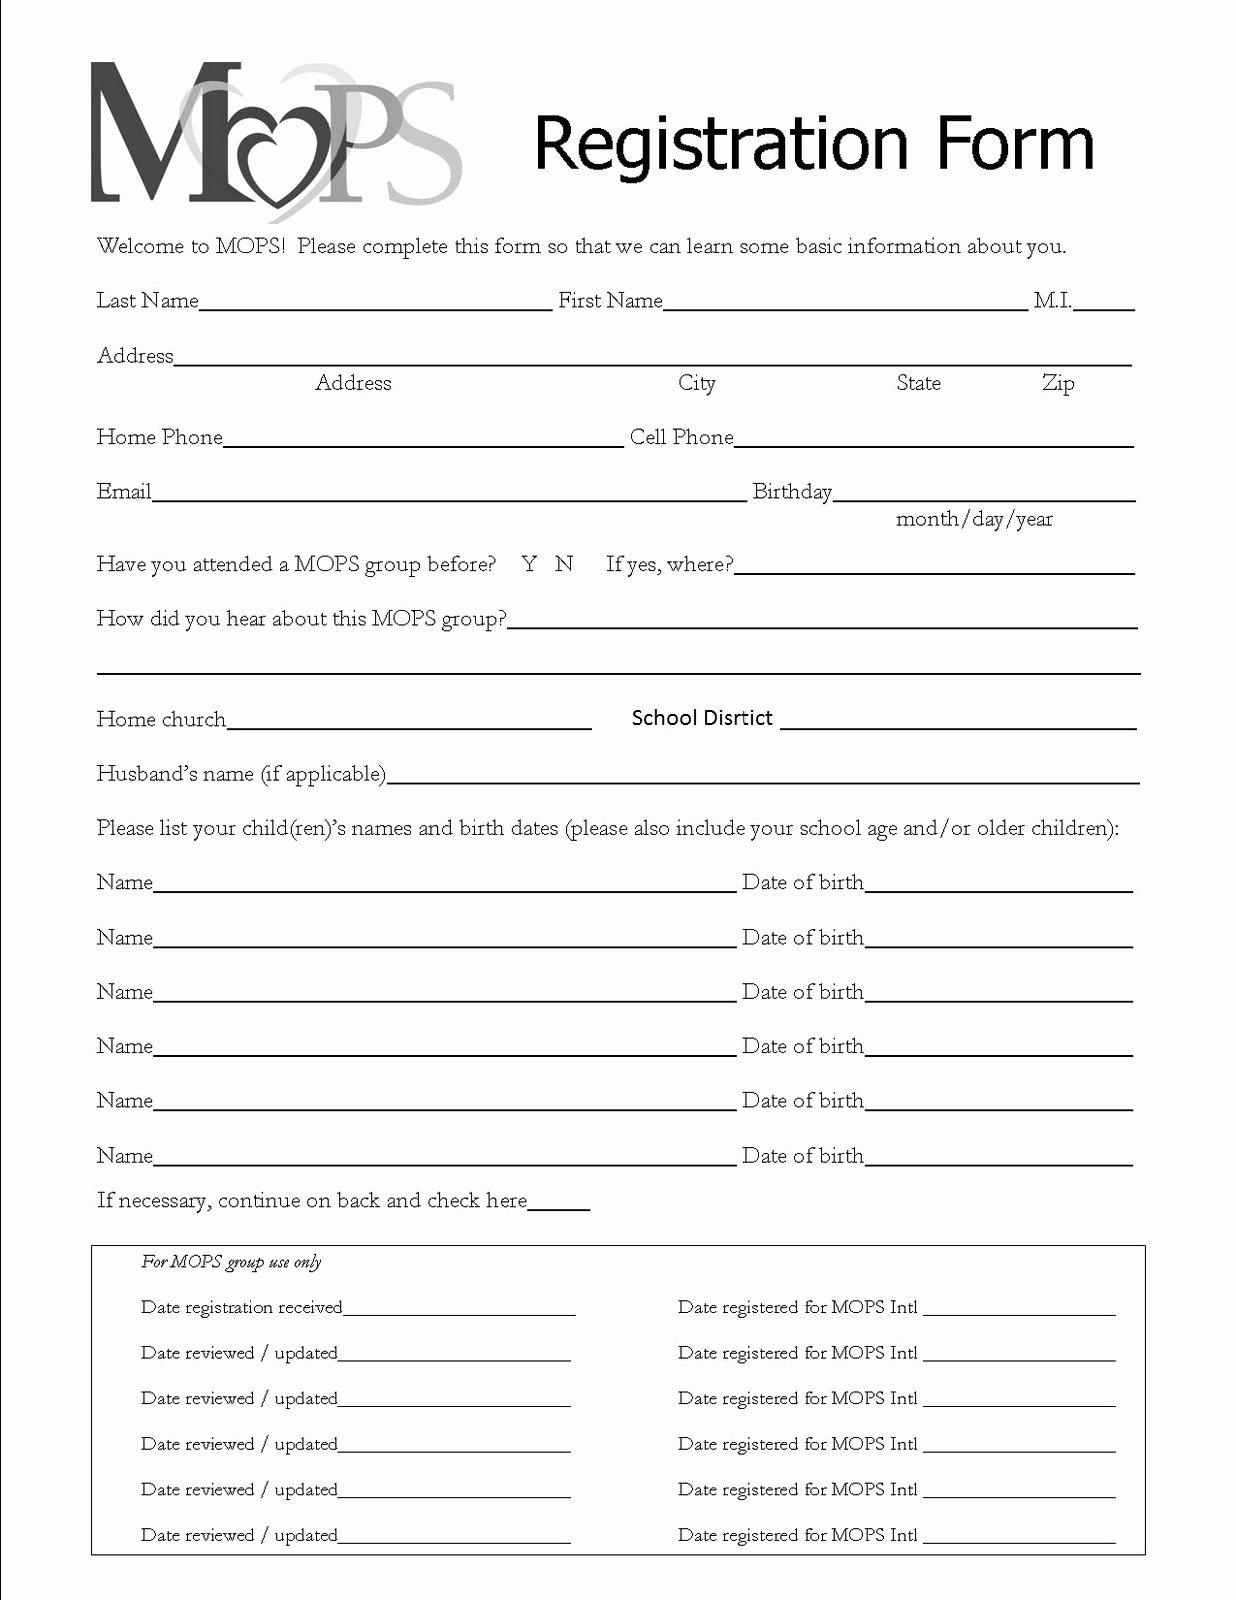 Printable Registration form Template Beautiful Mothers Of Preschoolers Chippewa Evangelical Free Church